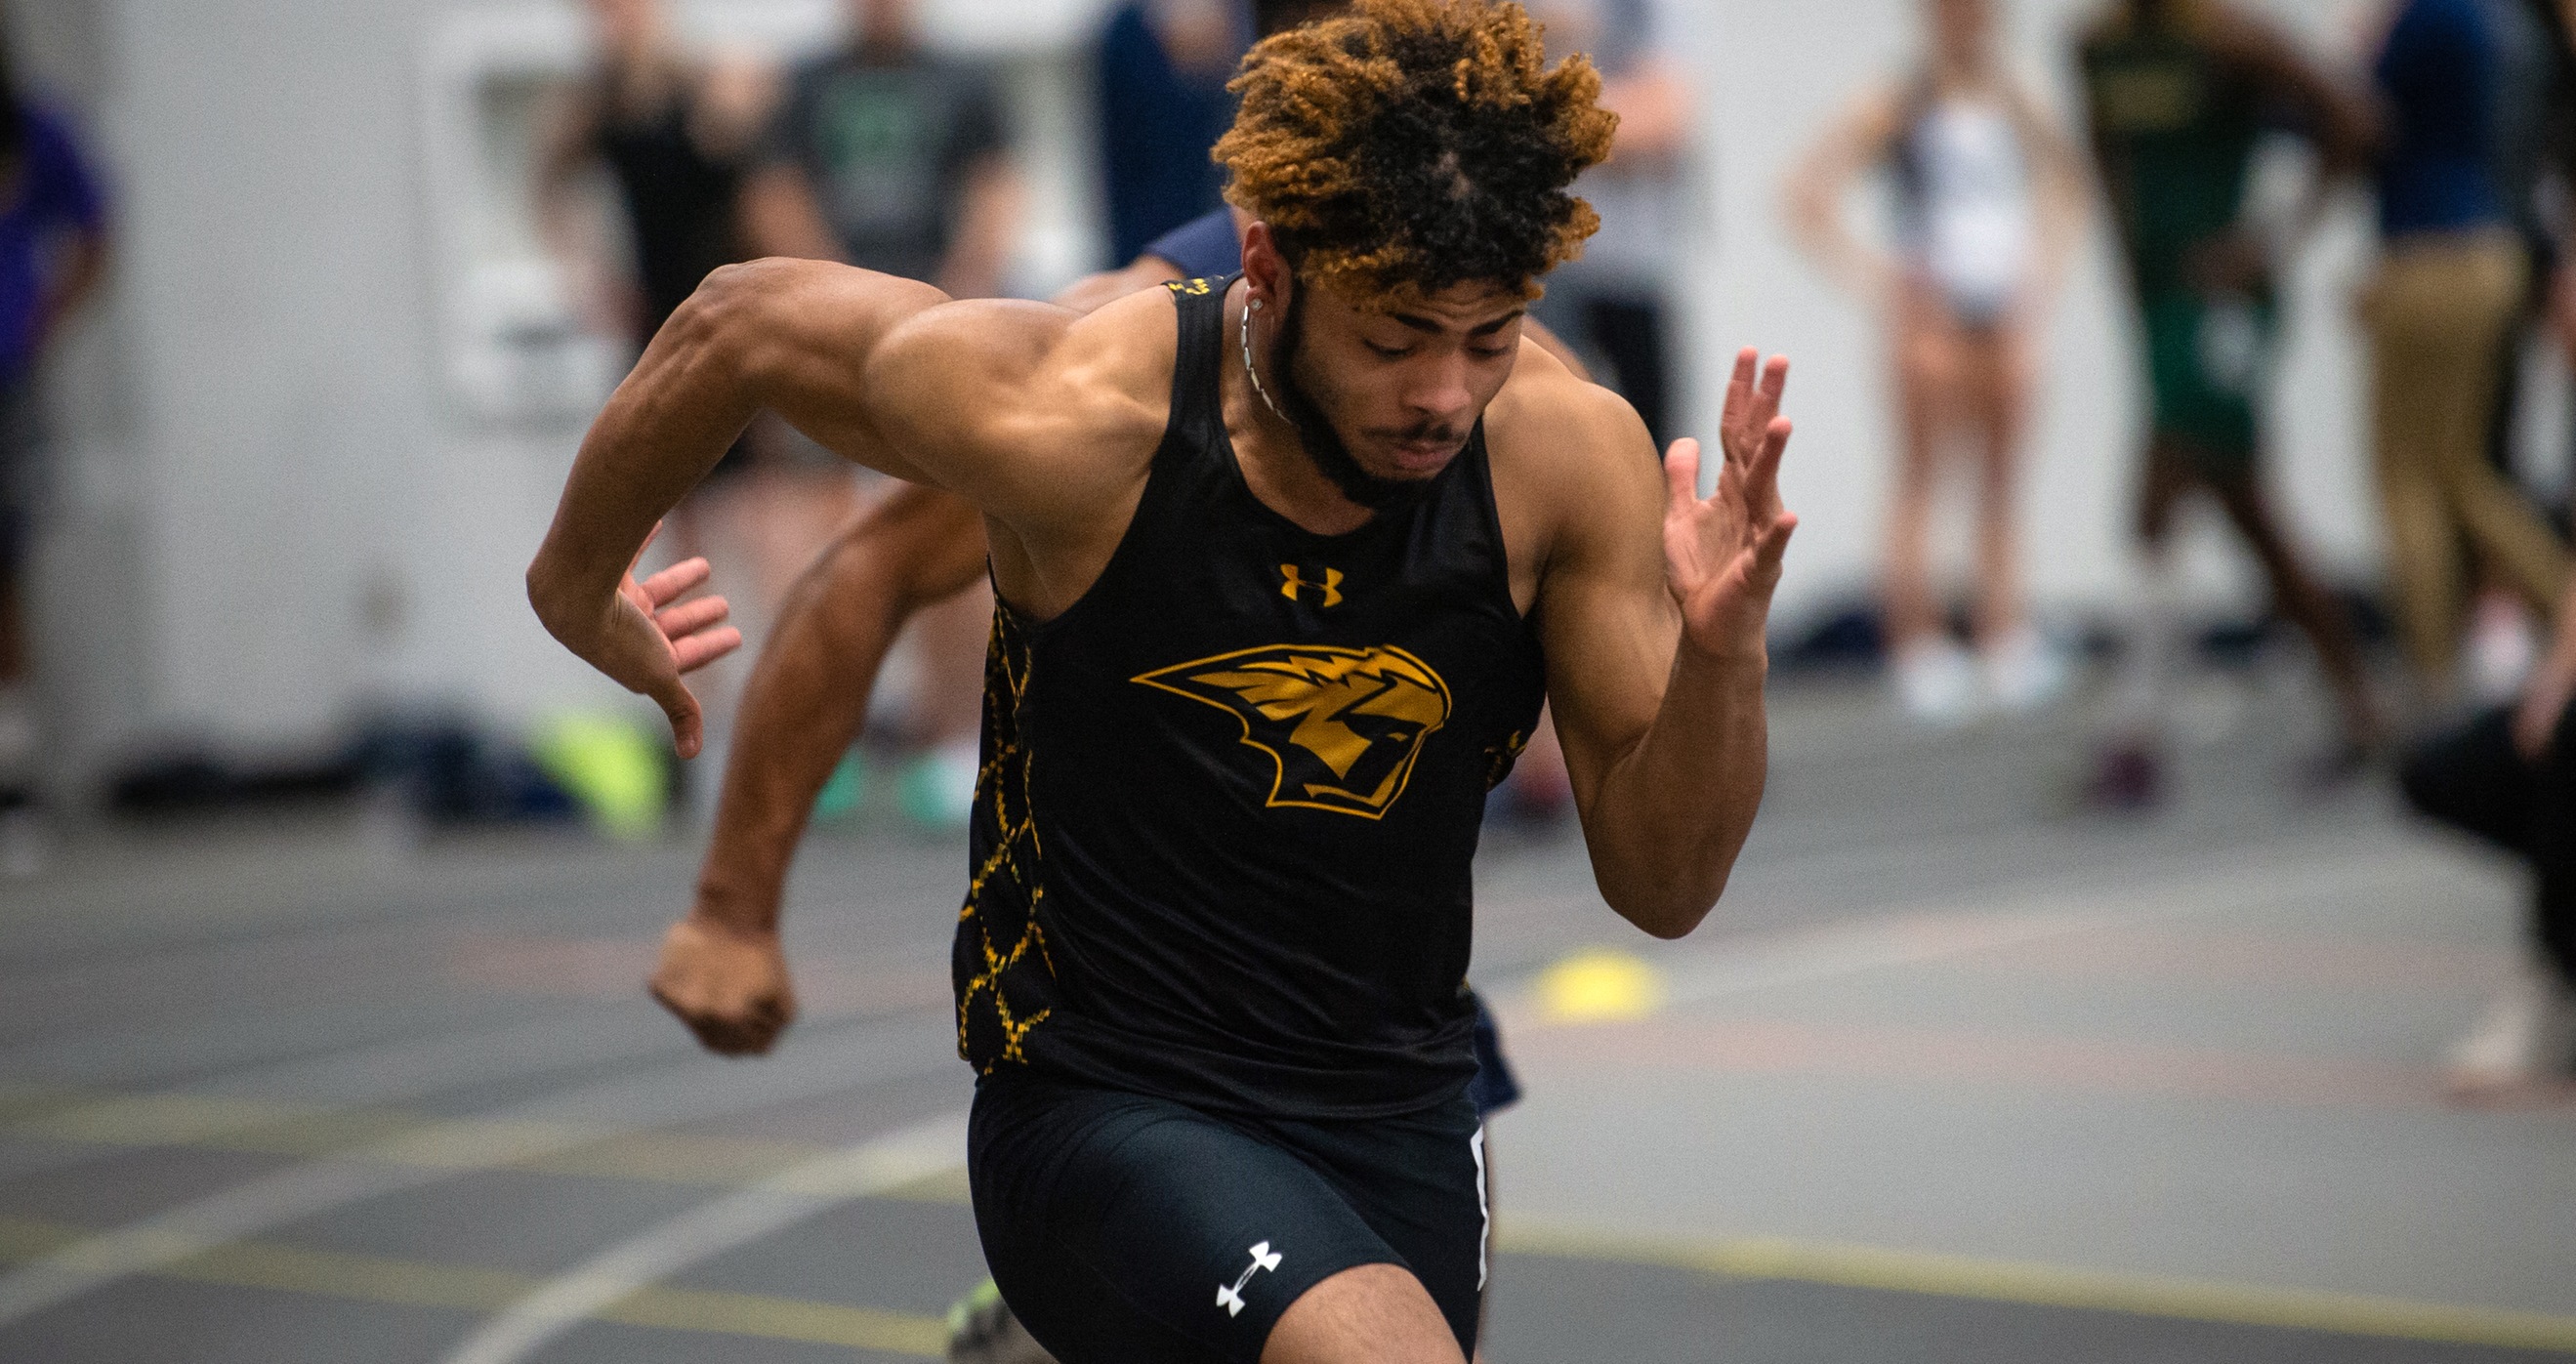 Jaylen Grant, who holds the UW-Oshkosh 60-meter dash record at 6.81 seconds, placed first in the 60- and third in the 200-meter dashes against the Warhawks.